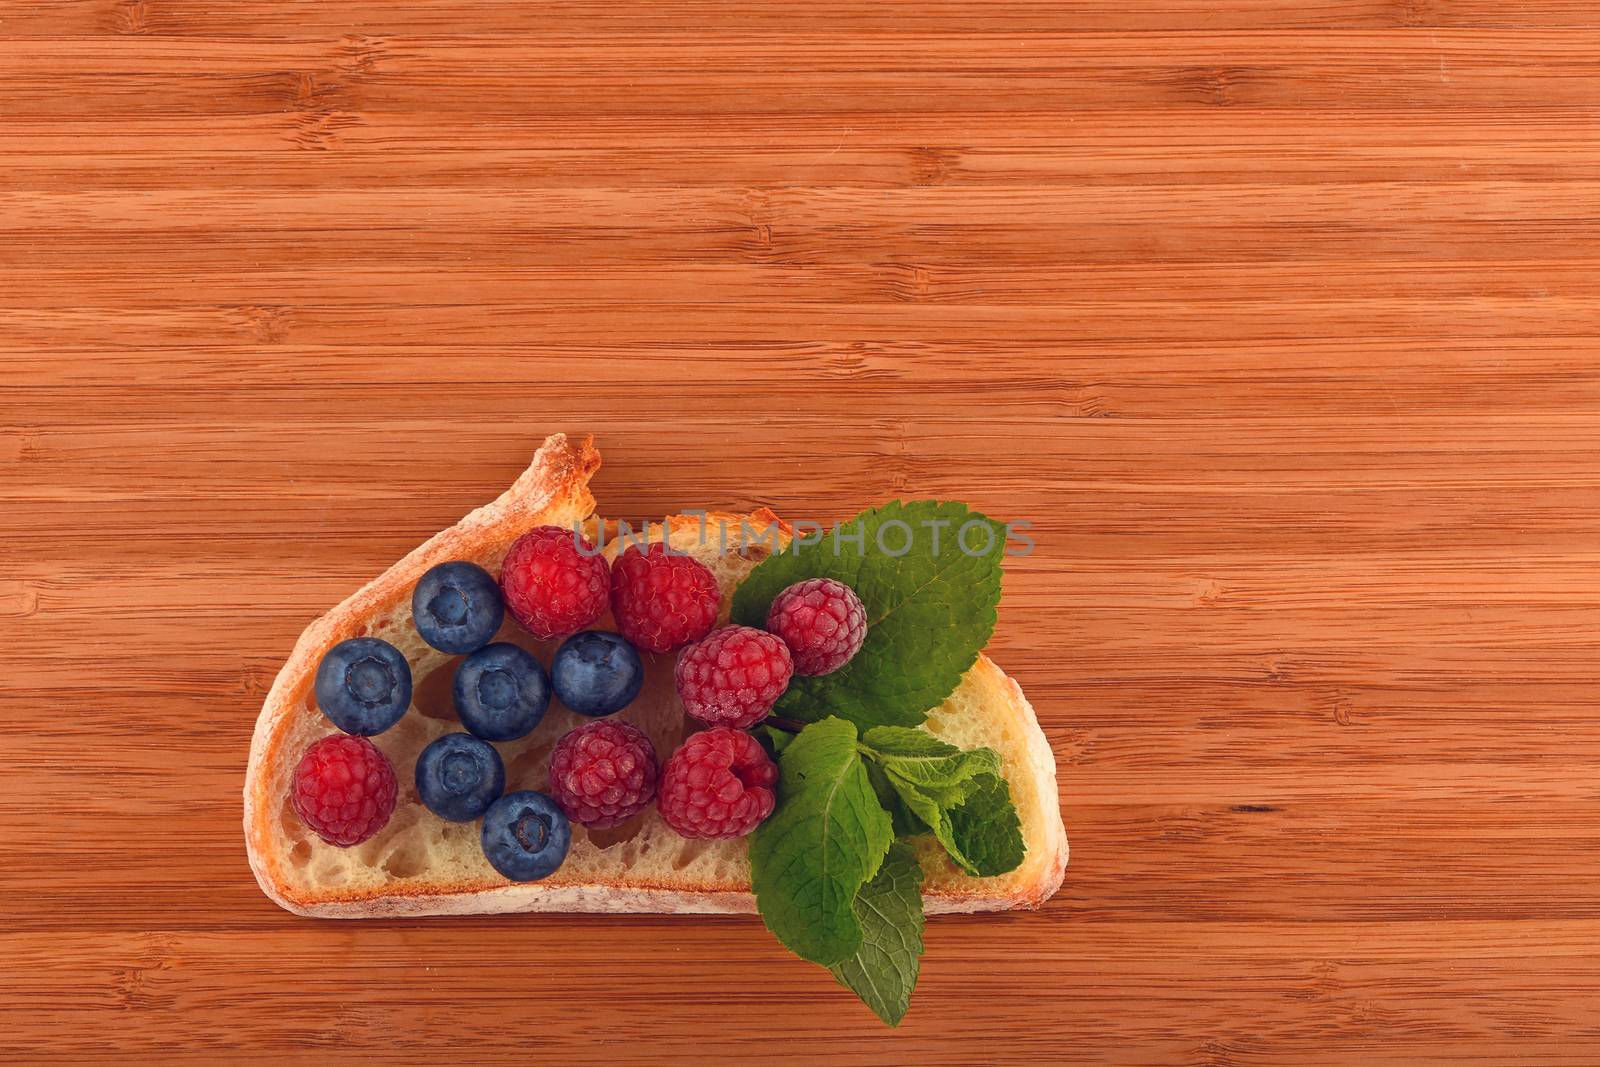 Better than caviar - cutting board with sandwich of mellow blueberries, raspberries and mint leaves on slice of wheat bread